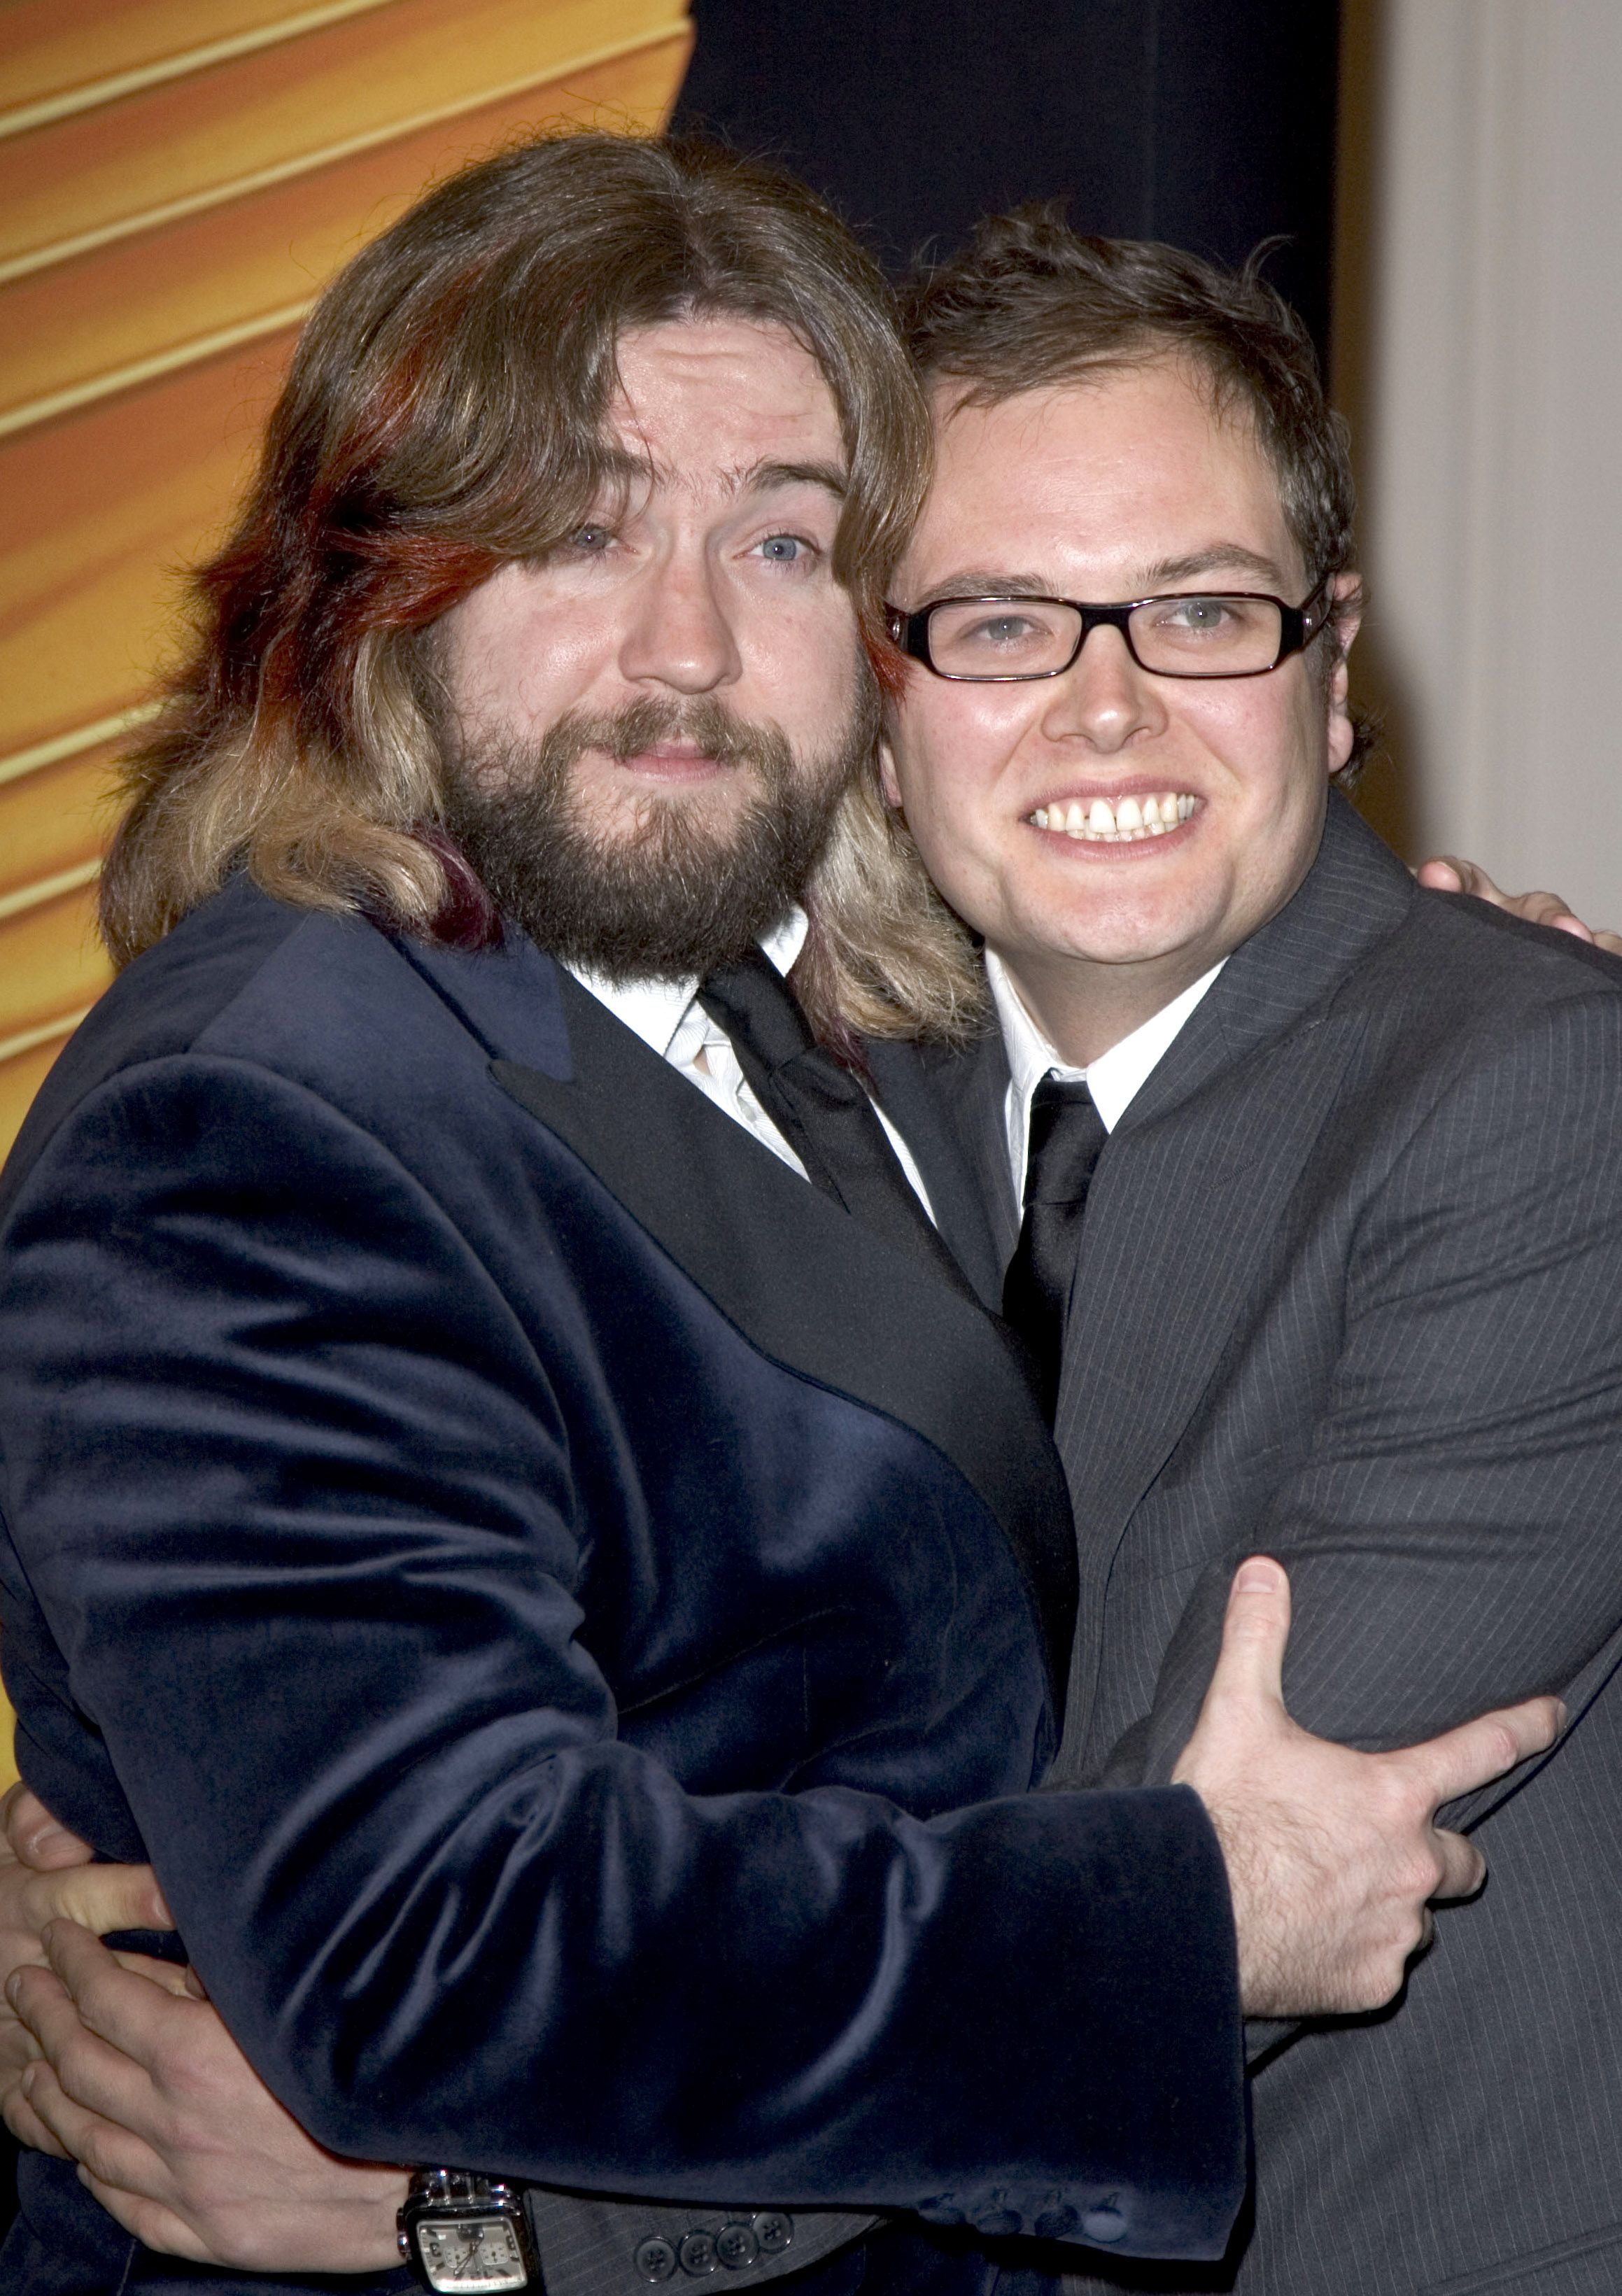 Alan Carr says he didn't want to throw Justin Lee Collins under the bus